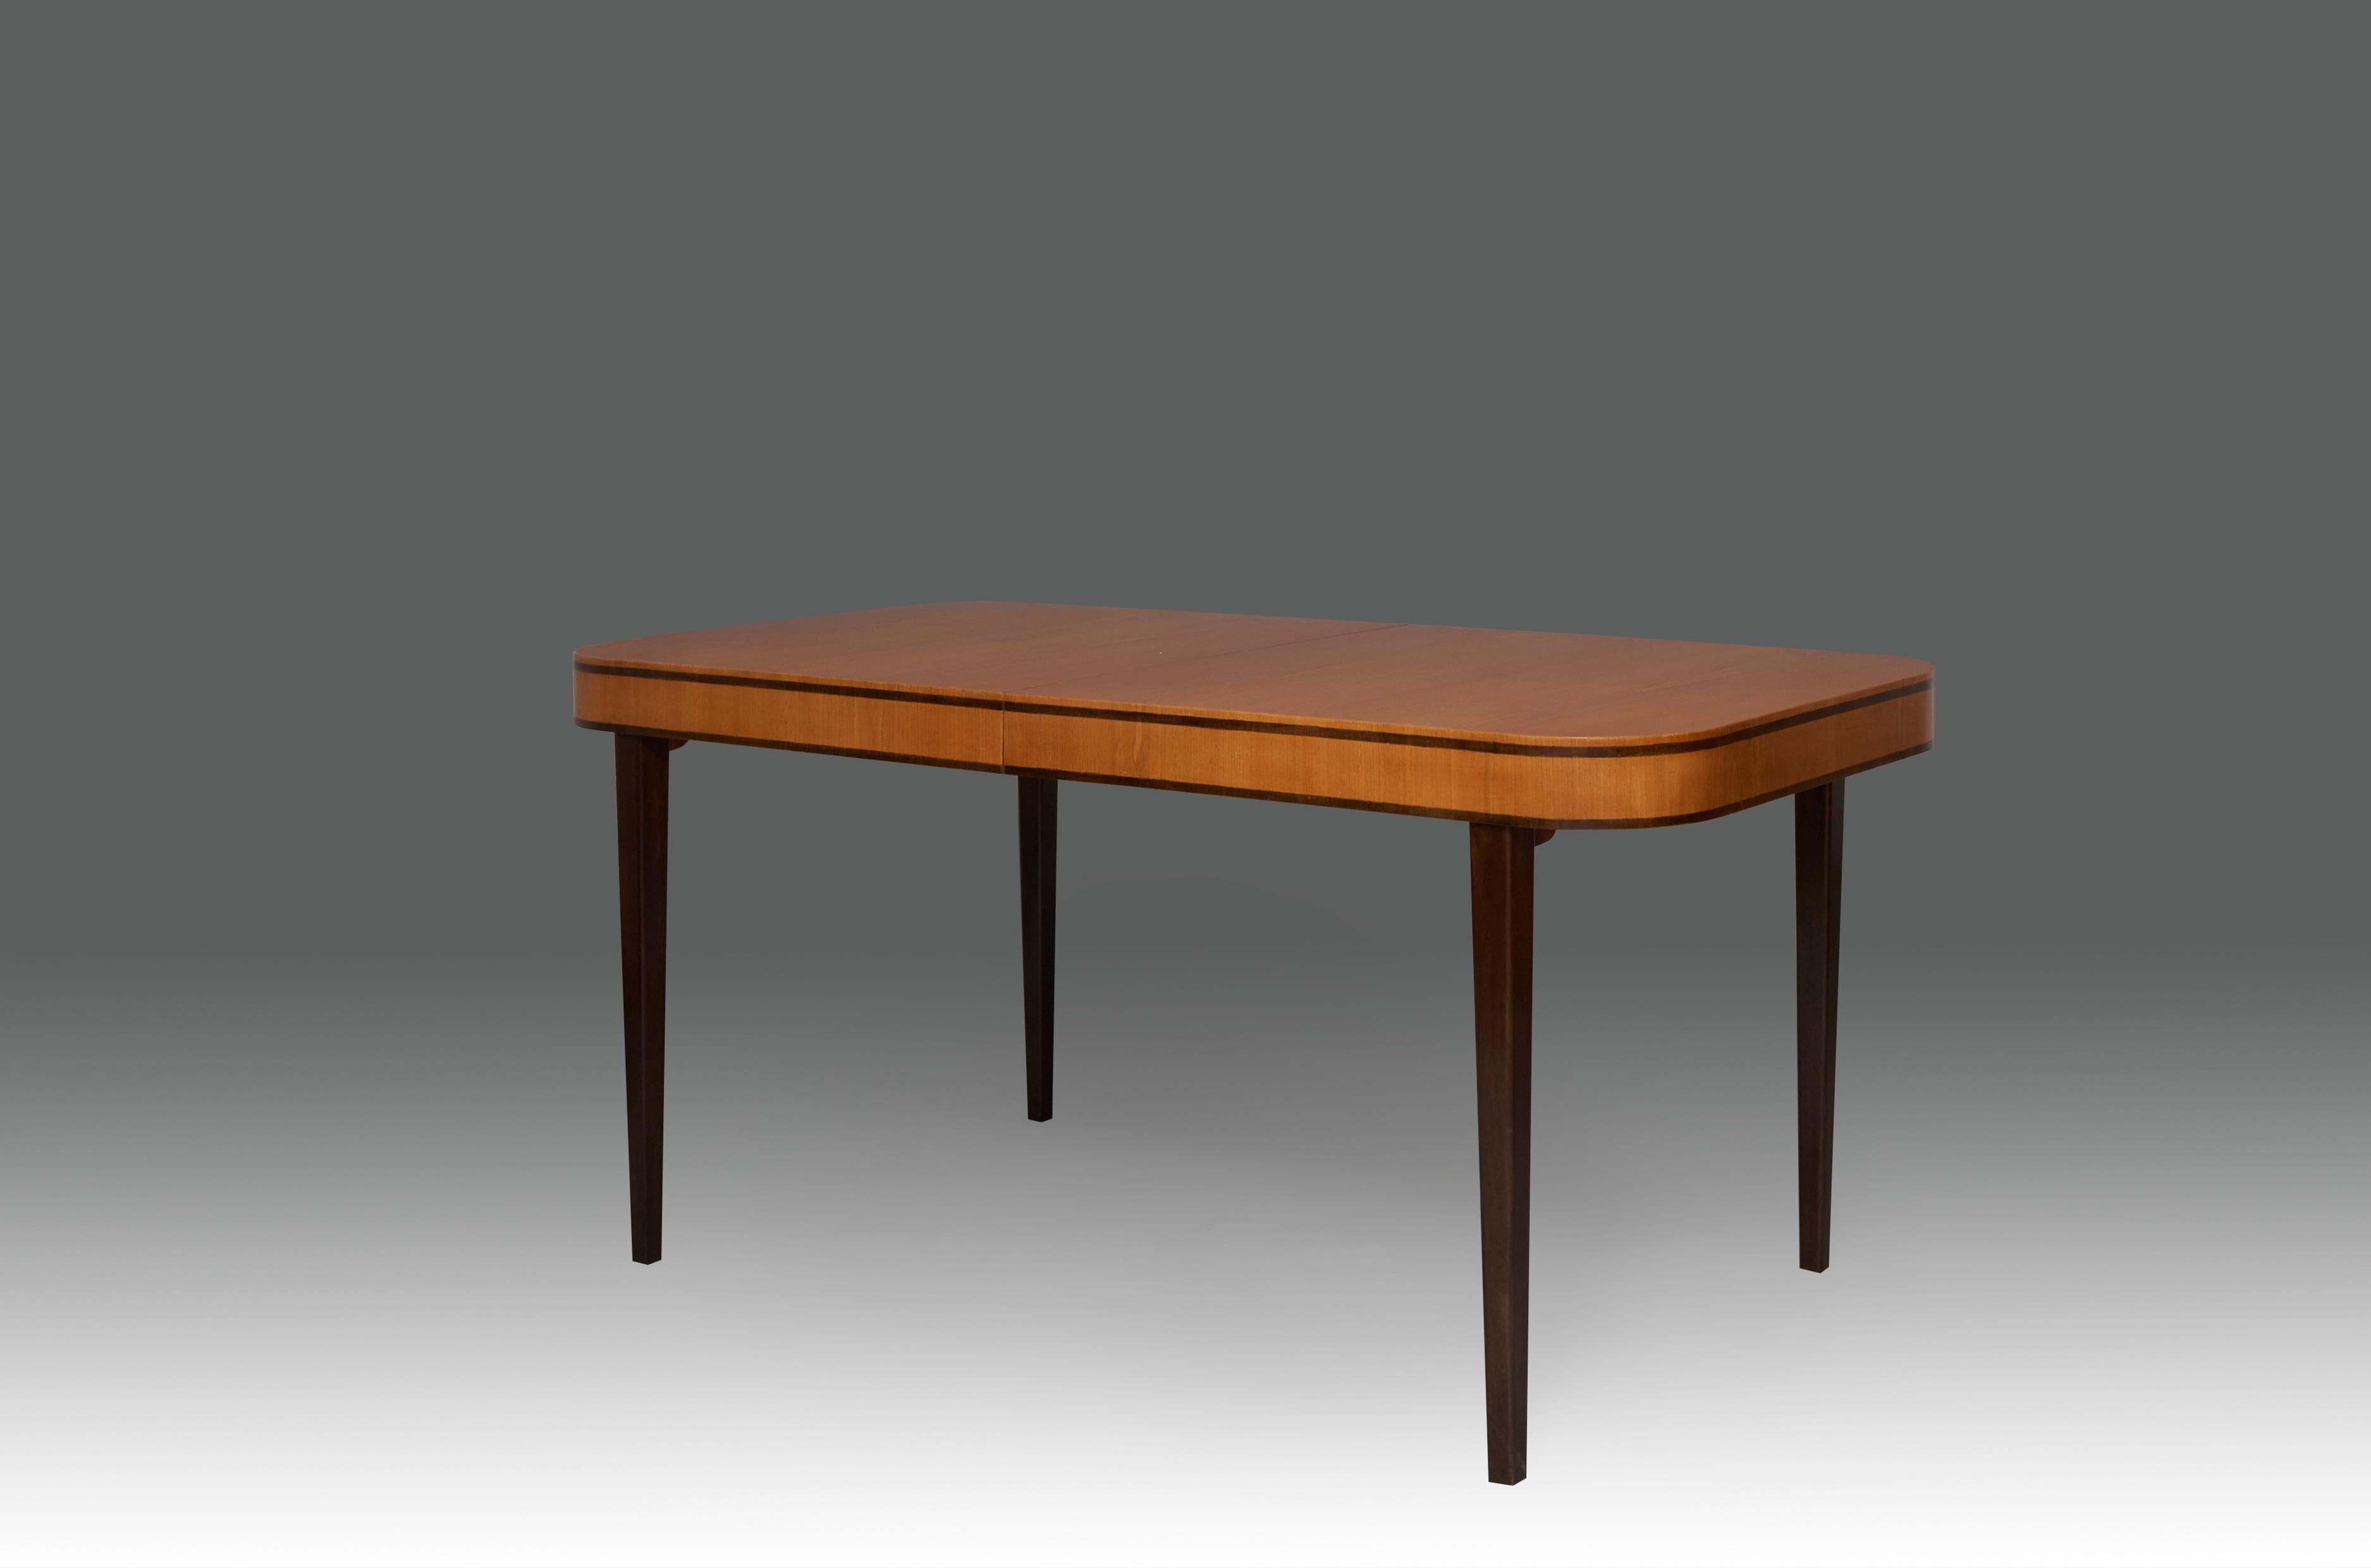 1930s dining table